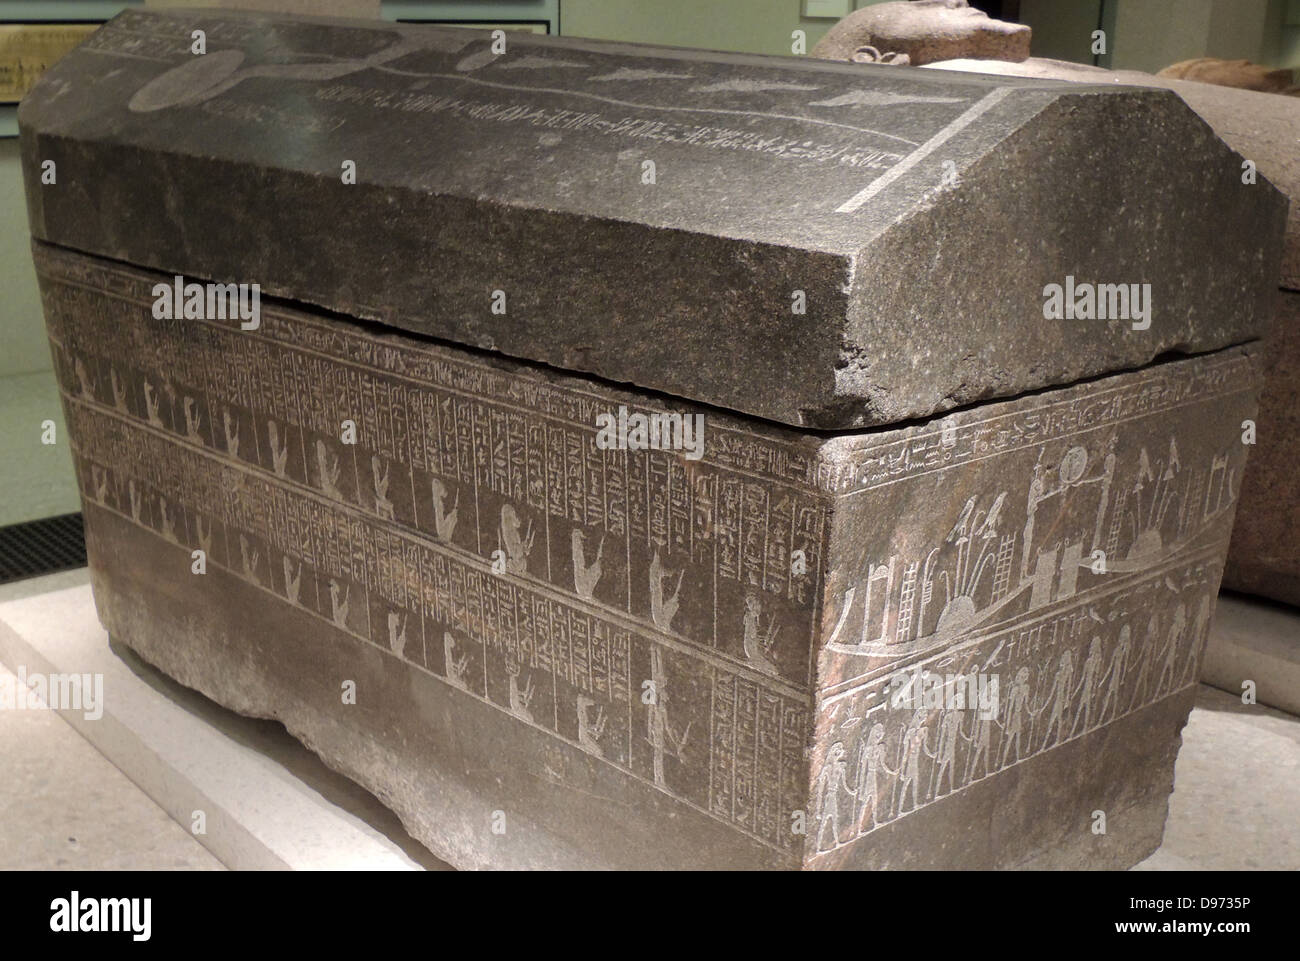 Sarcophagus of the general Pedi iset, 746-332 BC granite Sarcophagus of Anch-Hor with illustrations of daemons of the Netherworld, 746-332 BC Memphis Granodiorite. Stock Photo